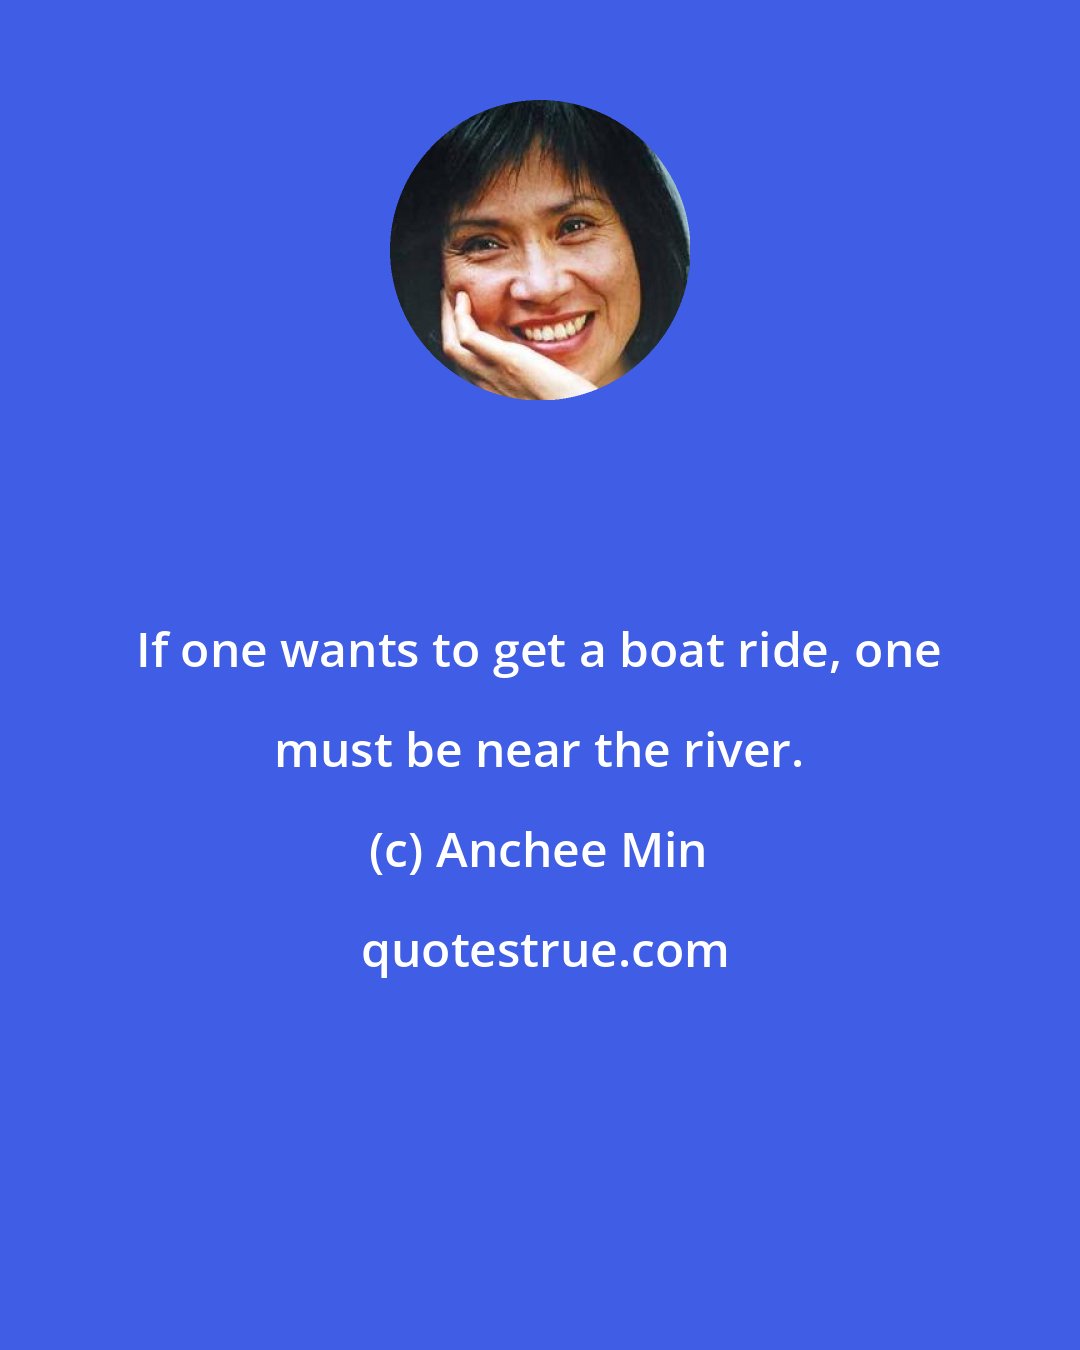 Anchee Min: If one wants to get a boat ride, one must be near the river.